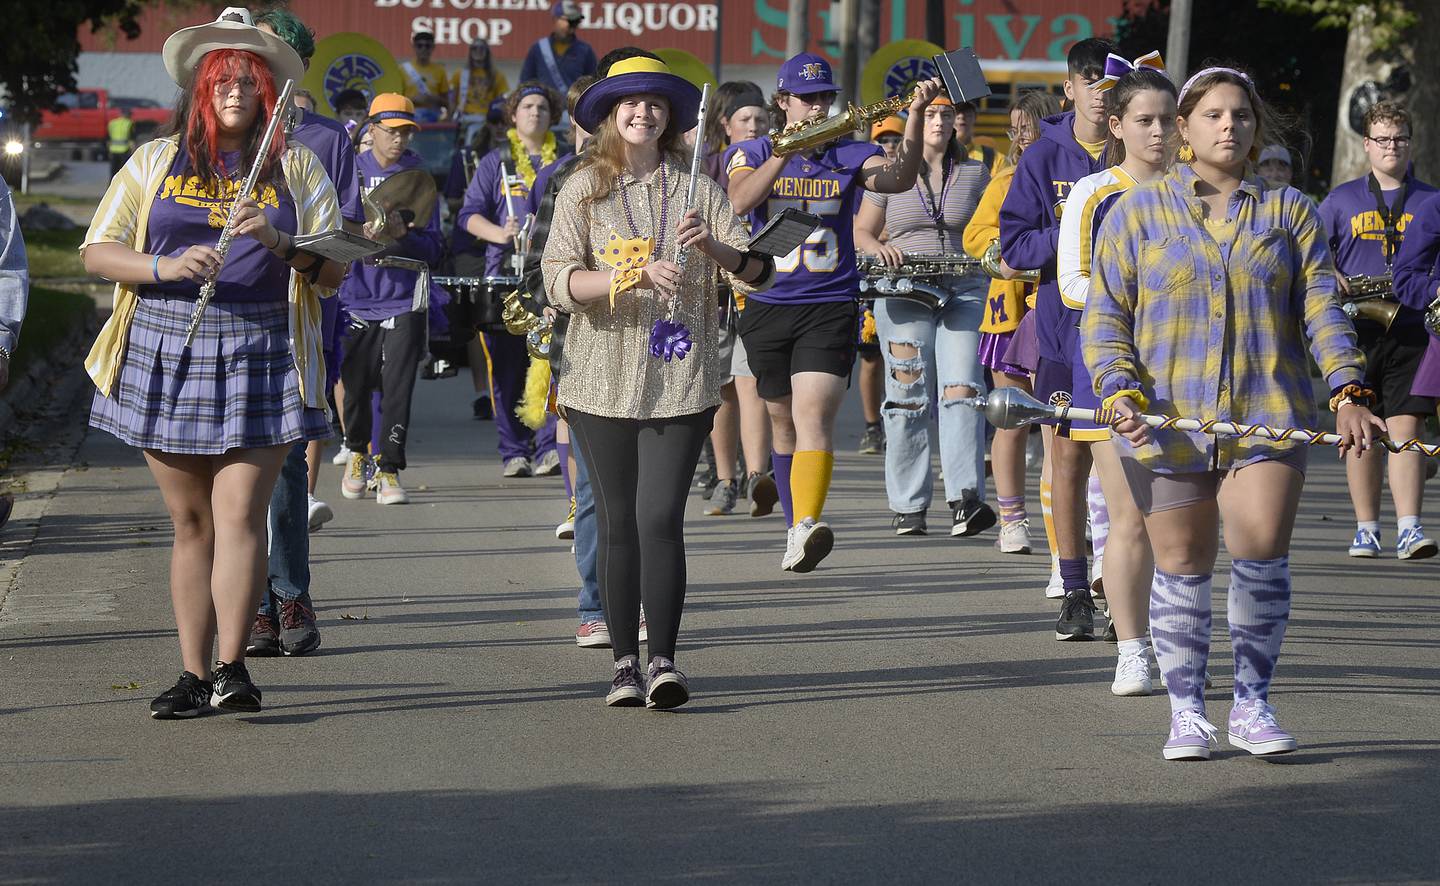 The Mendota High School Marching Band, dressed in colorful attire, marches down Wisconsin Street on Thursday, Oct. 6, 2022, during the school’s homecoming parade.